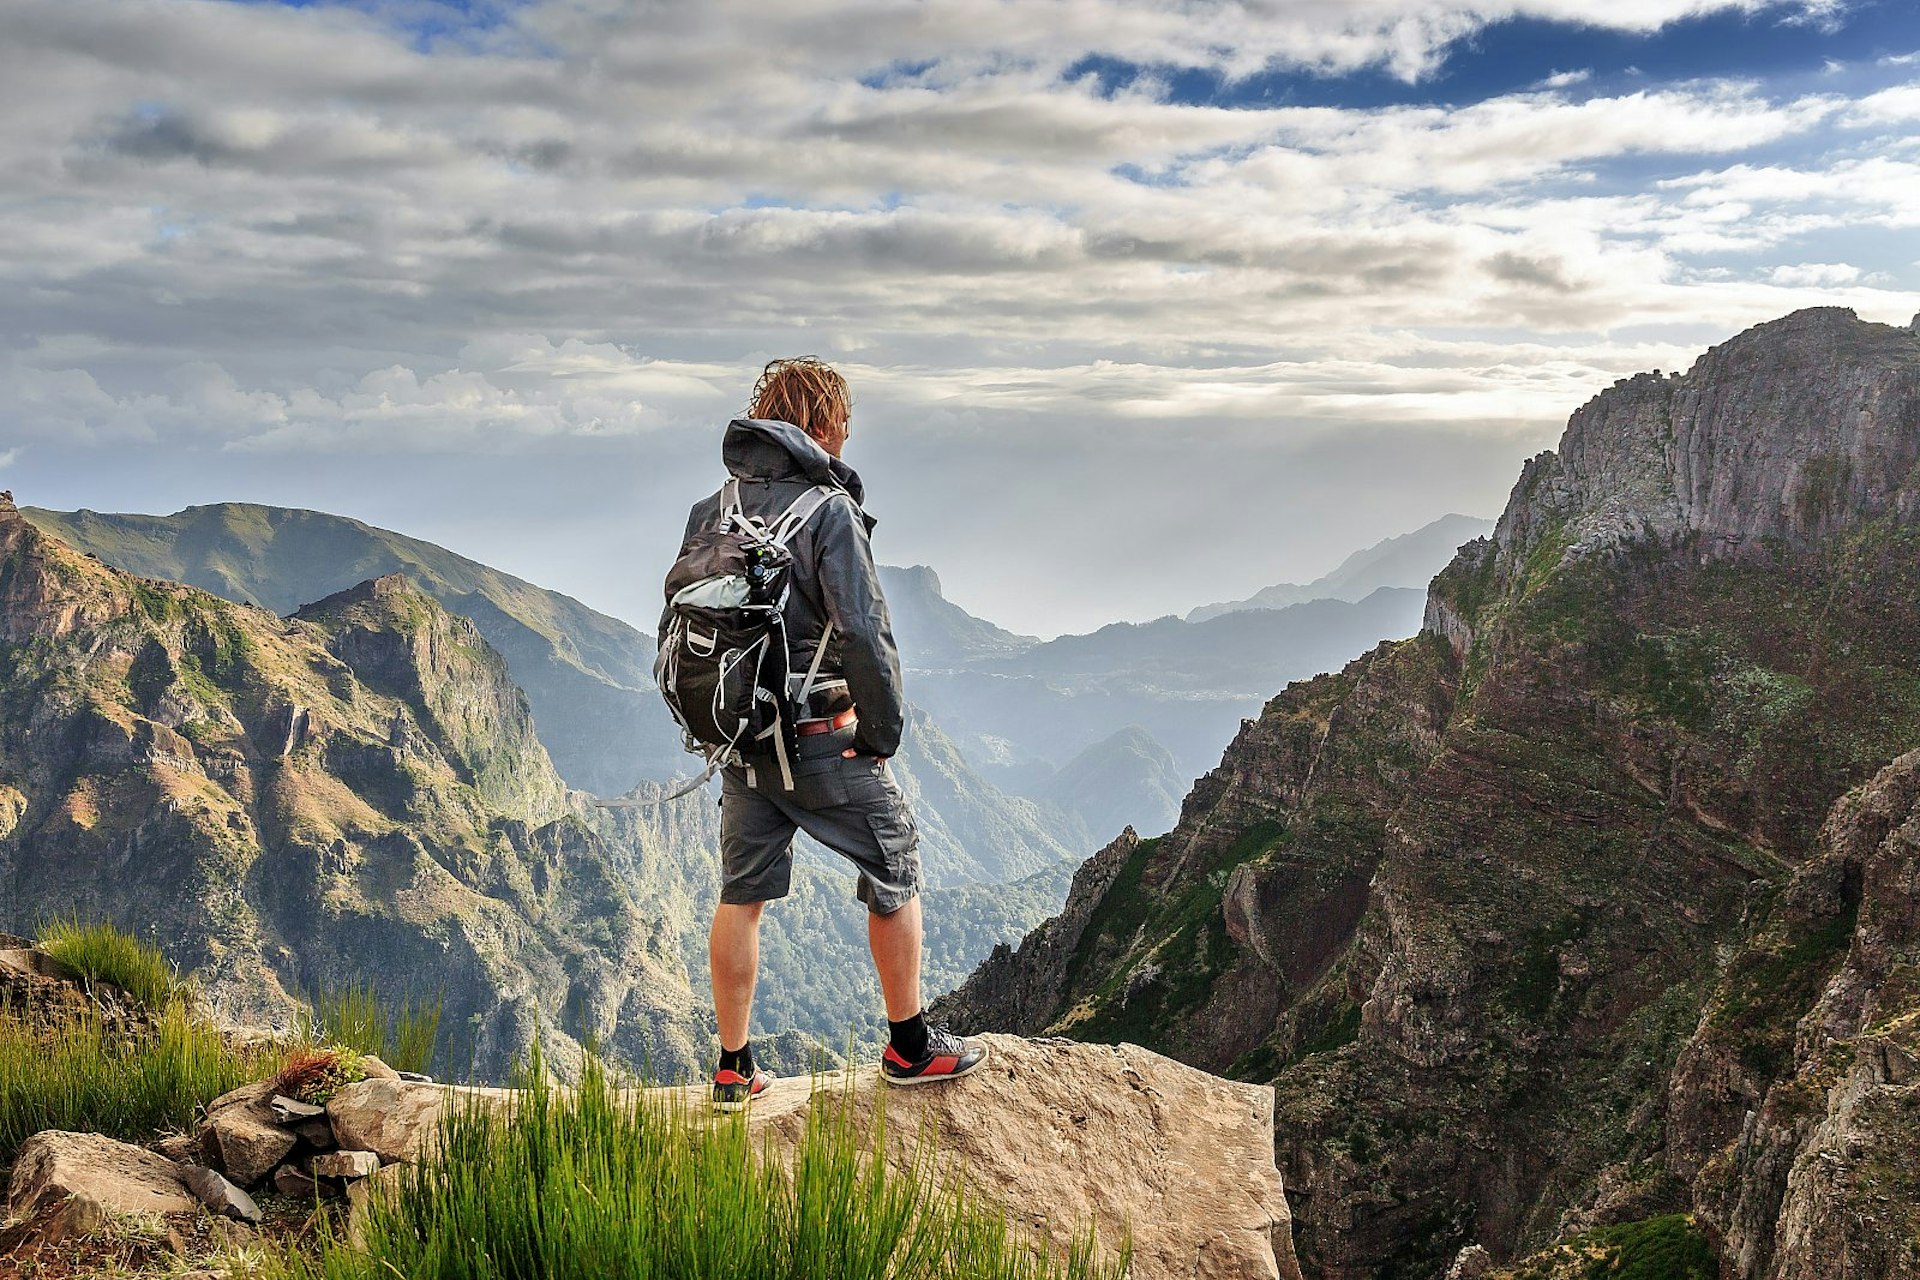 A hiker stands on a rocky ledge looking out over the rugged mountain scenery of the Pico do Arieiro in Madeira. They wear a waterproof jacket, back pack and shorts in shades of grey.